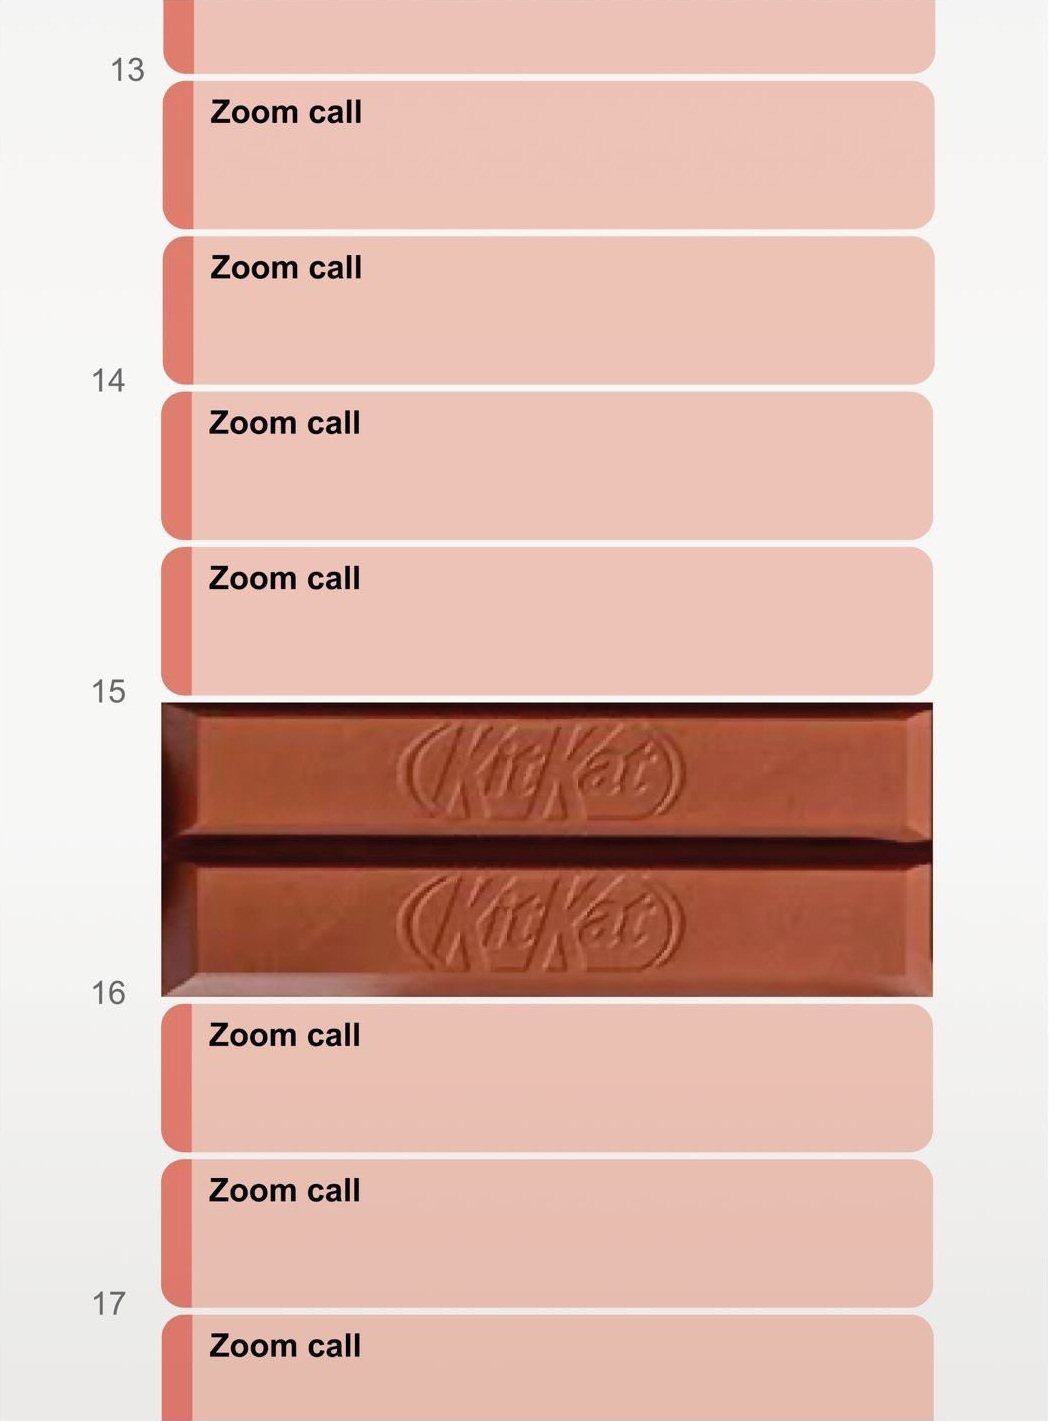 KitKat new norm content